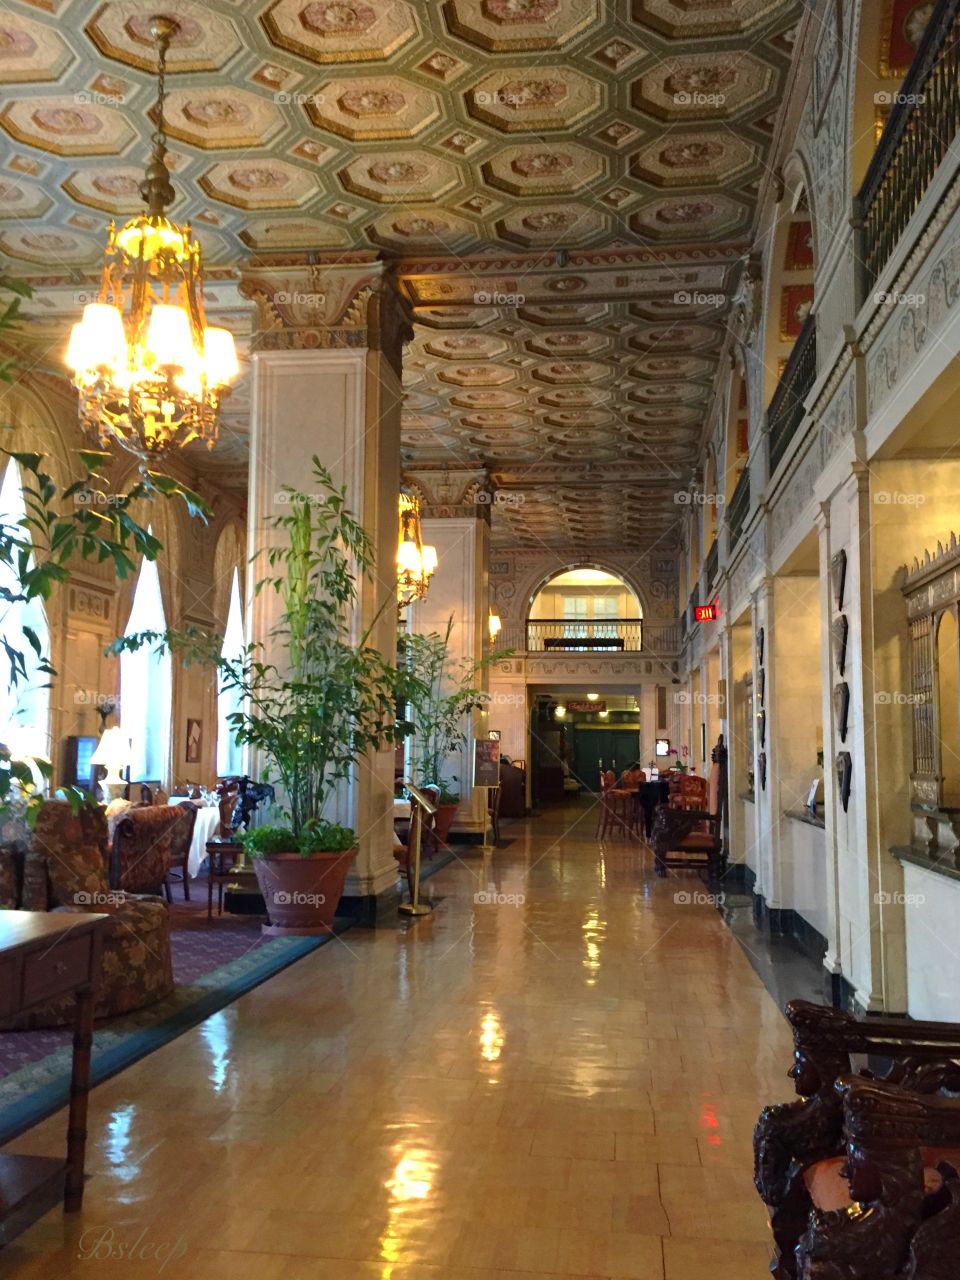 The Brown Lobby